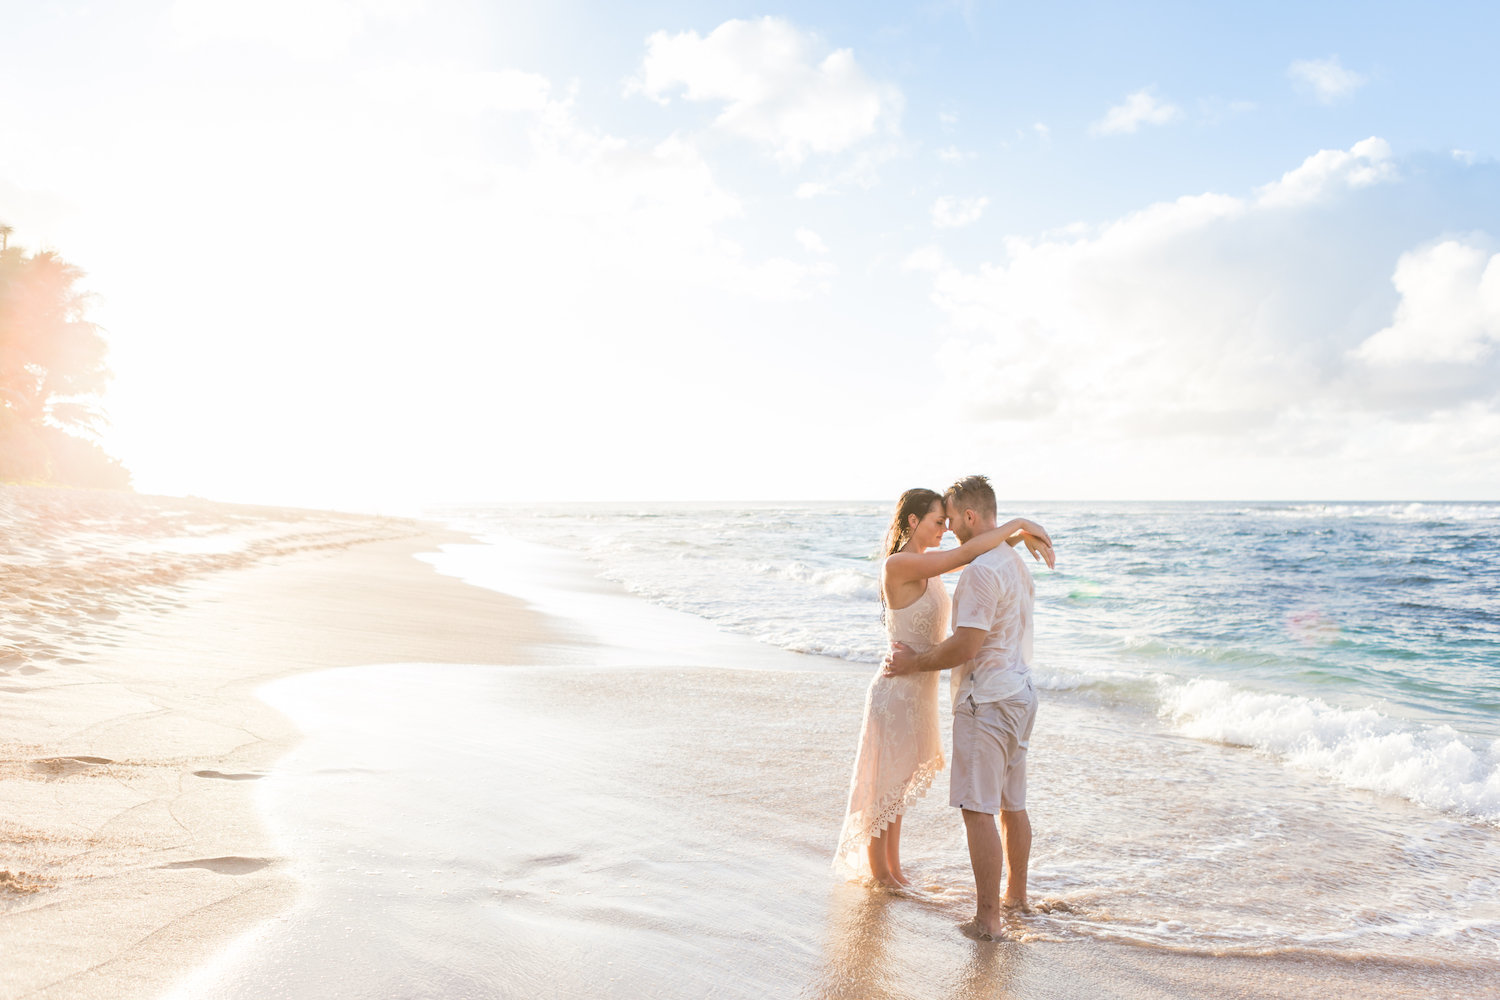 Our Hawaii Sunset Photo Session At Kaena Point, 45% OFF